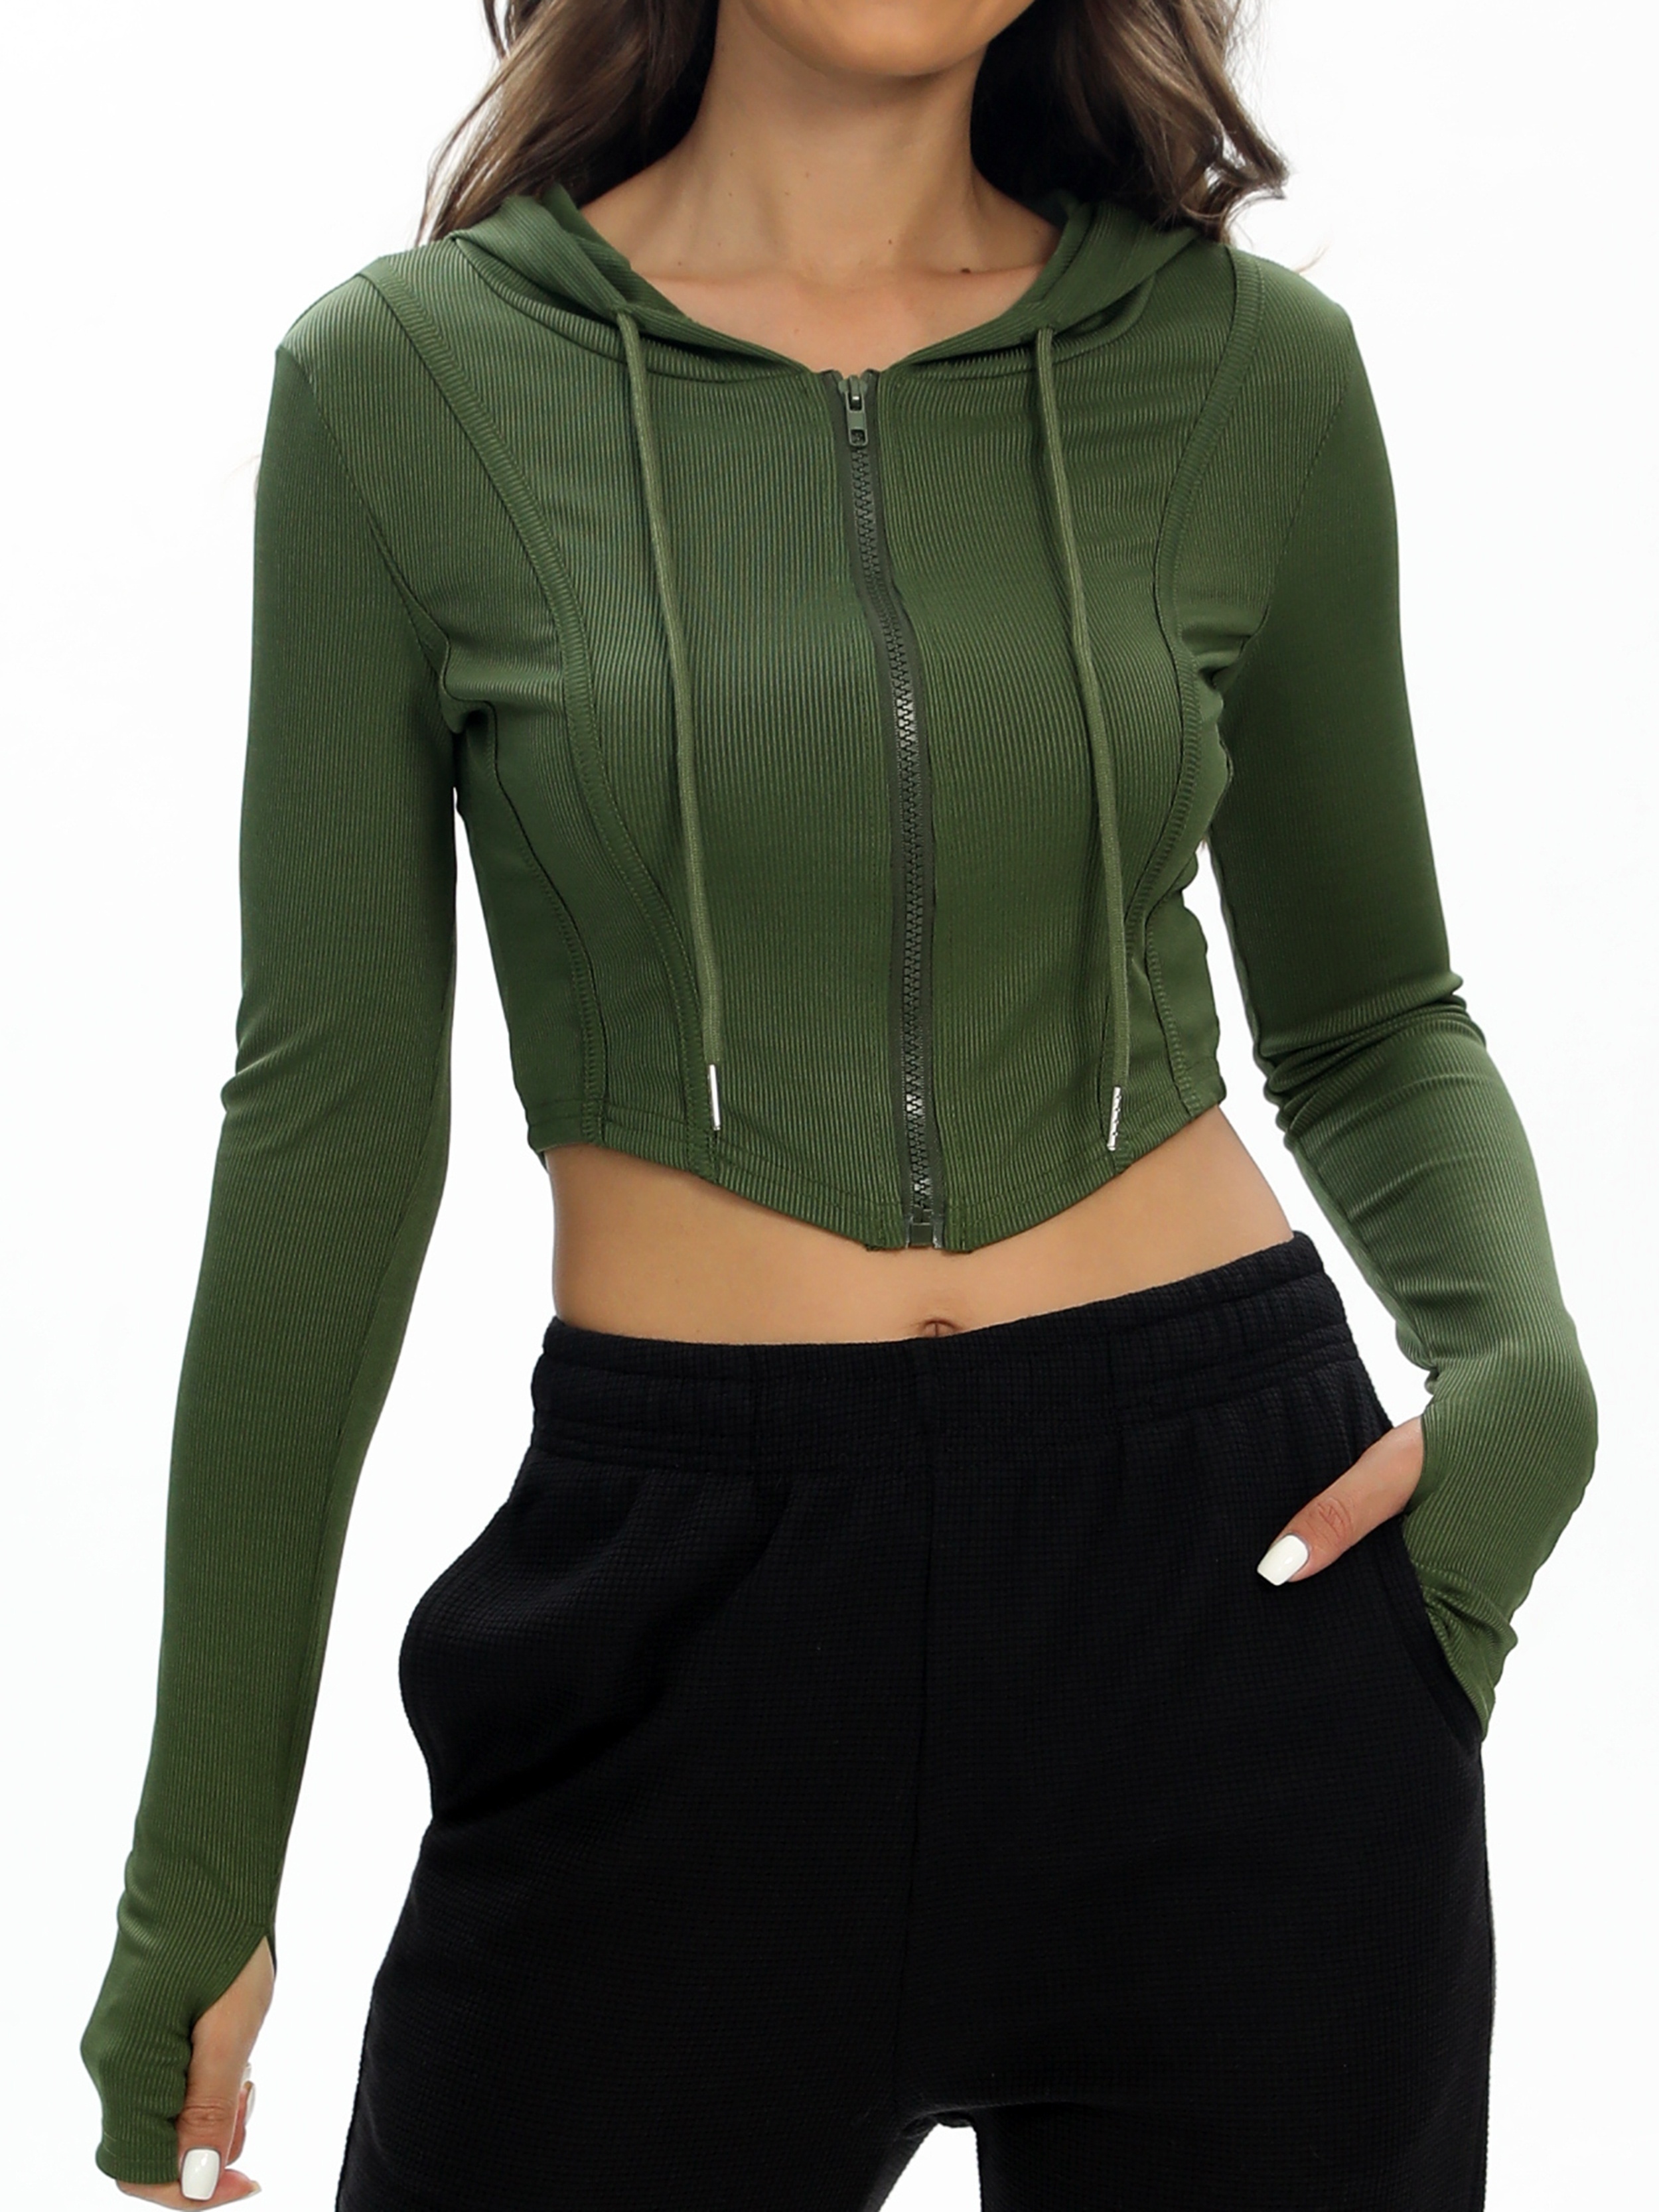 Women's Long Sleeve Zip Up Gym Top - Olive Green